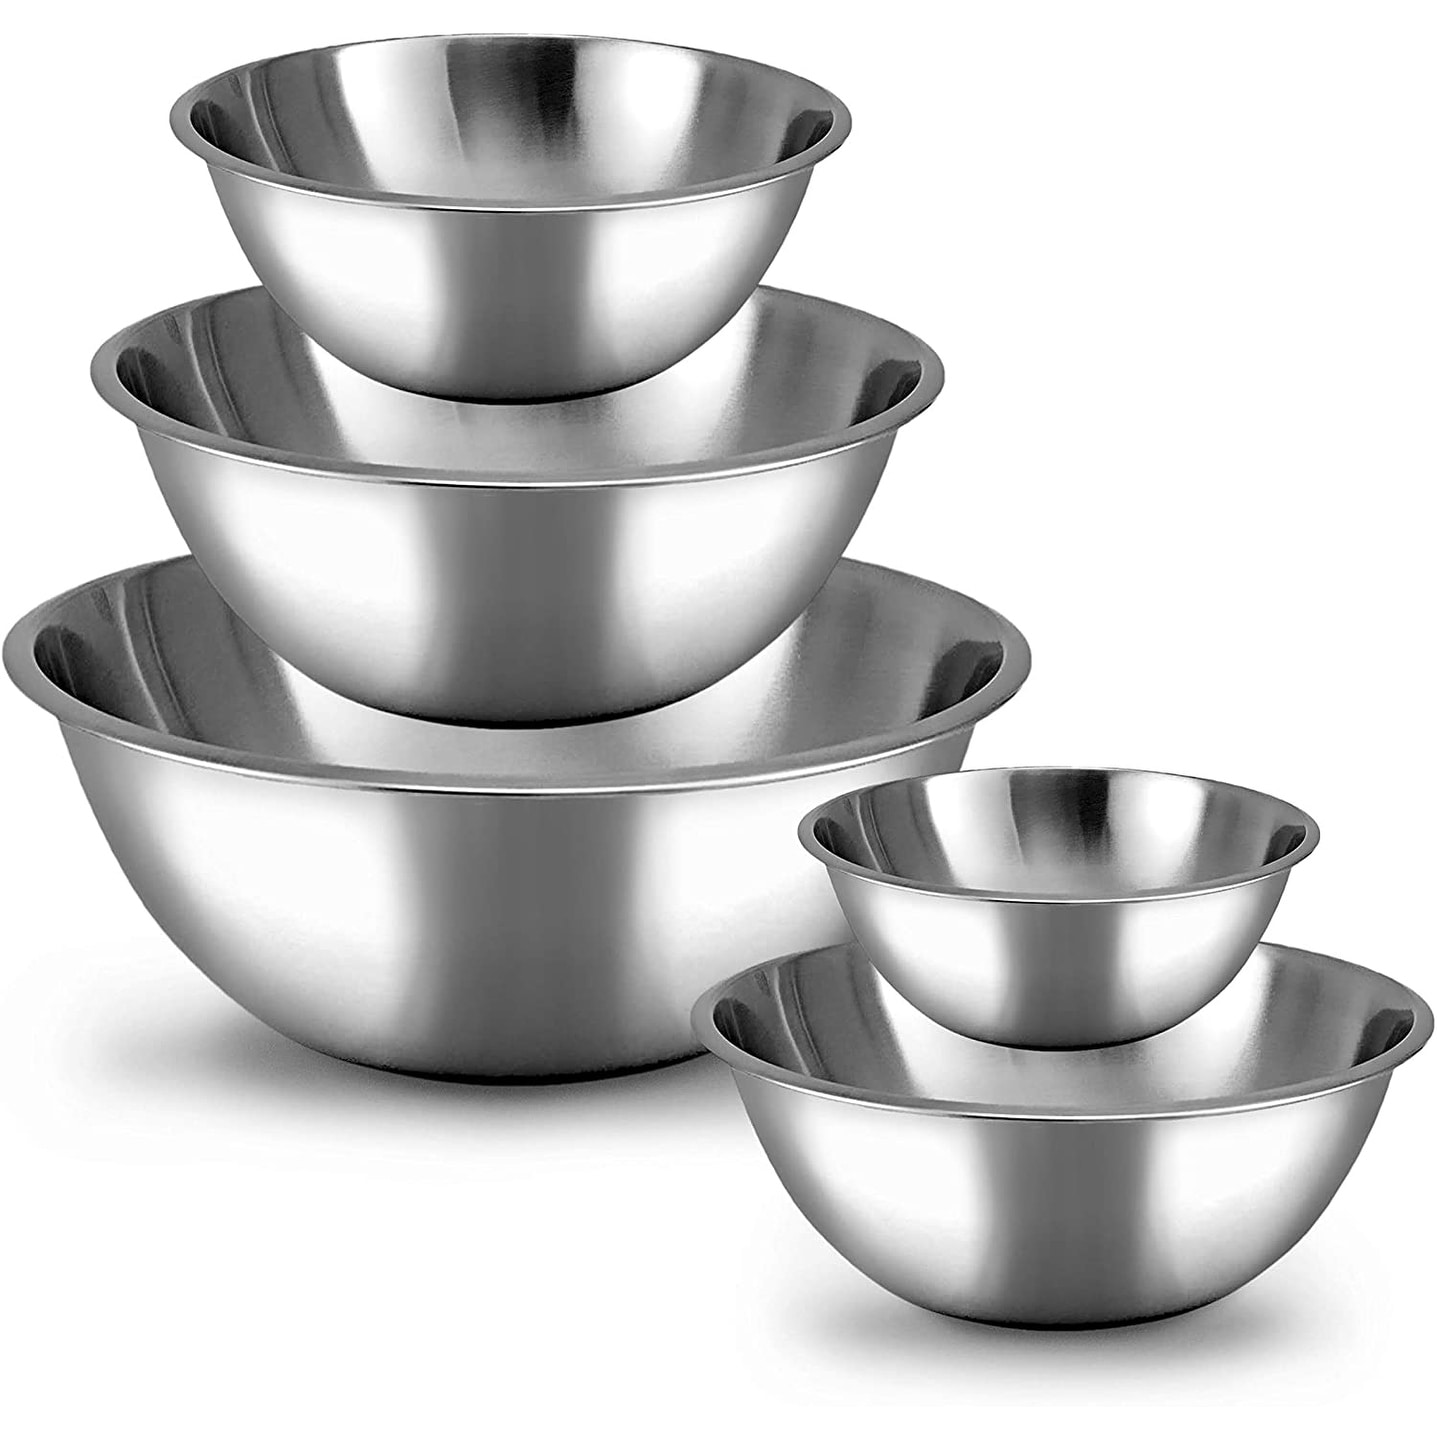 https://ak1.ostkcdn.com/images/products/is/images/direct/fec7d6baece59c52b6eee14f899659c271276f8e/Set-of-5-Meal-Prep-Stainless-Steel-Mixing-Bowls-Set.jpg